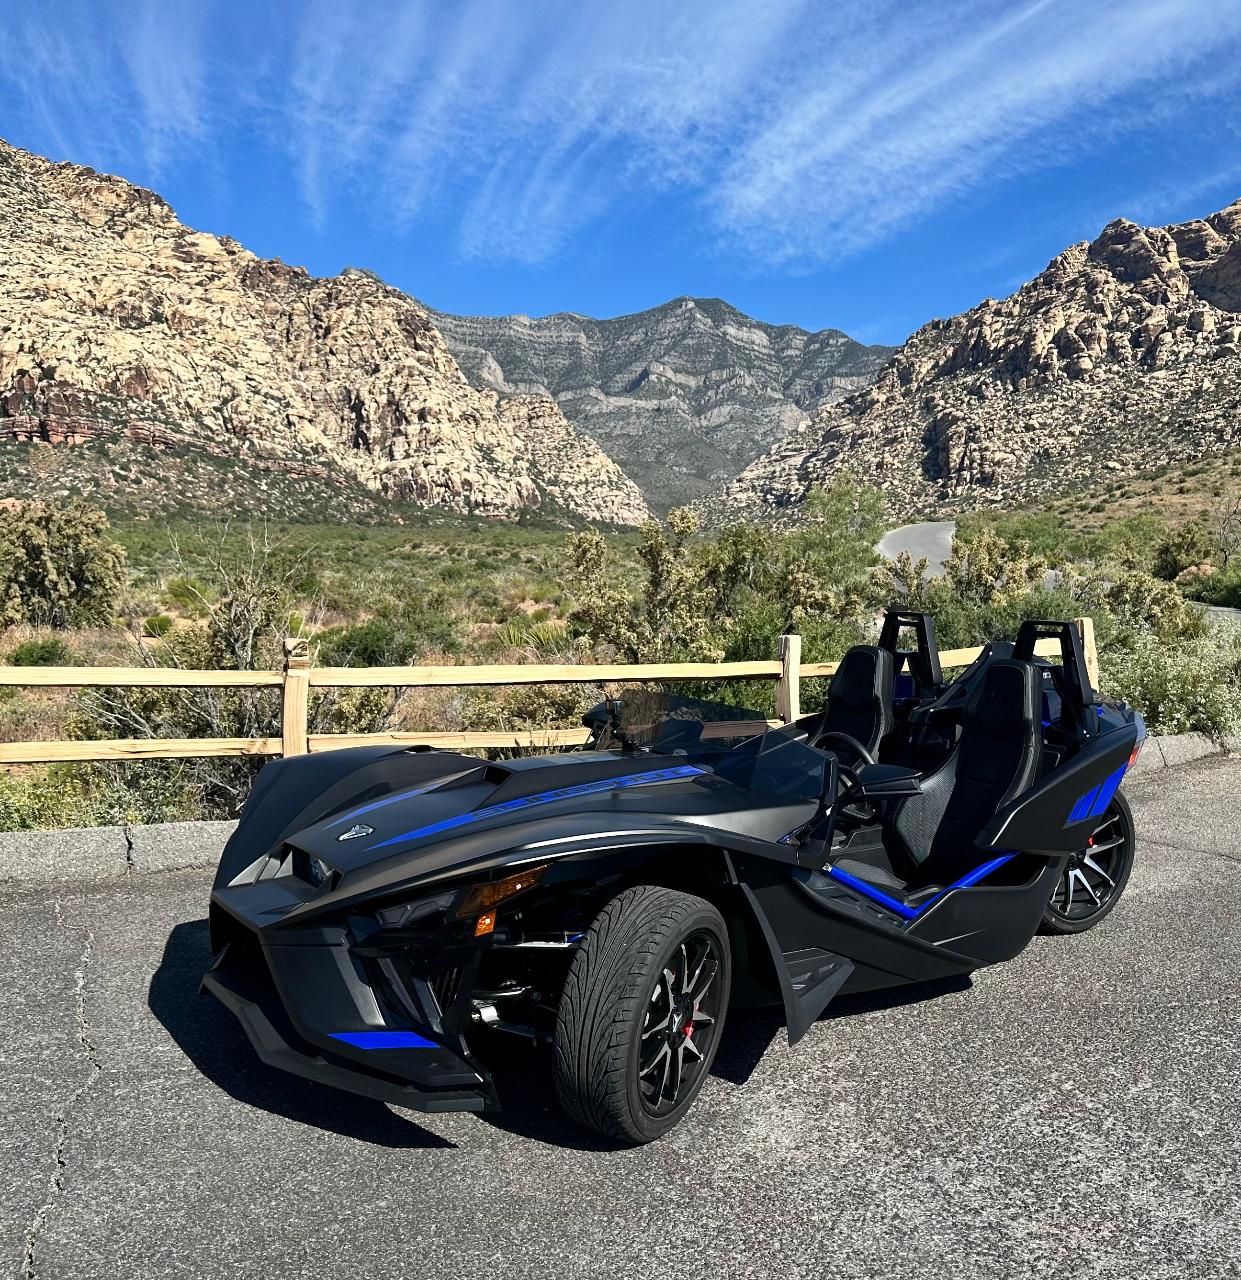 Red Rock Canyon Automatic Slingshot Tour